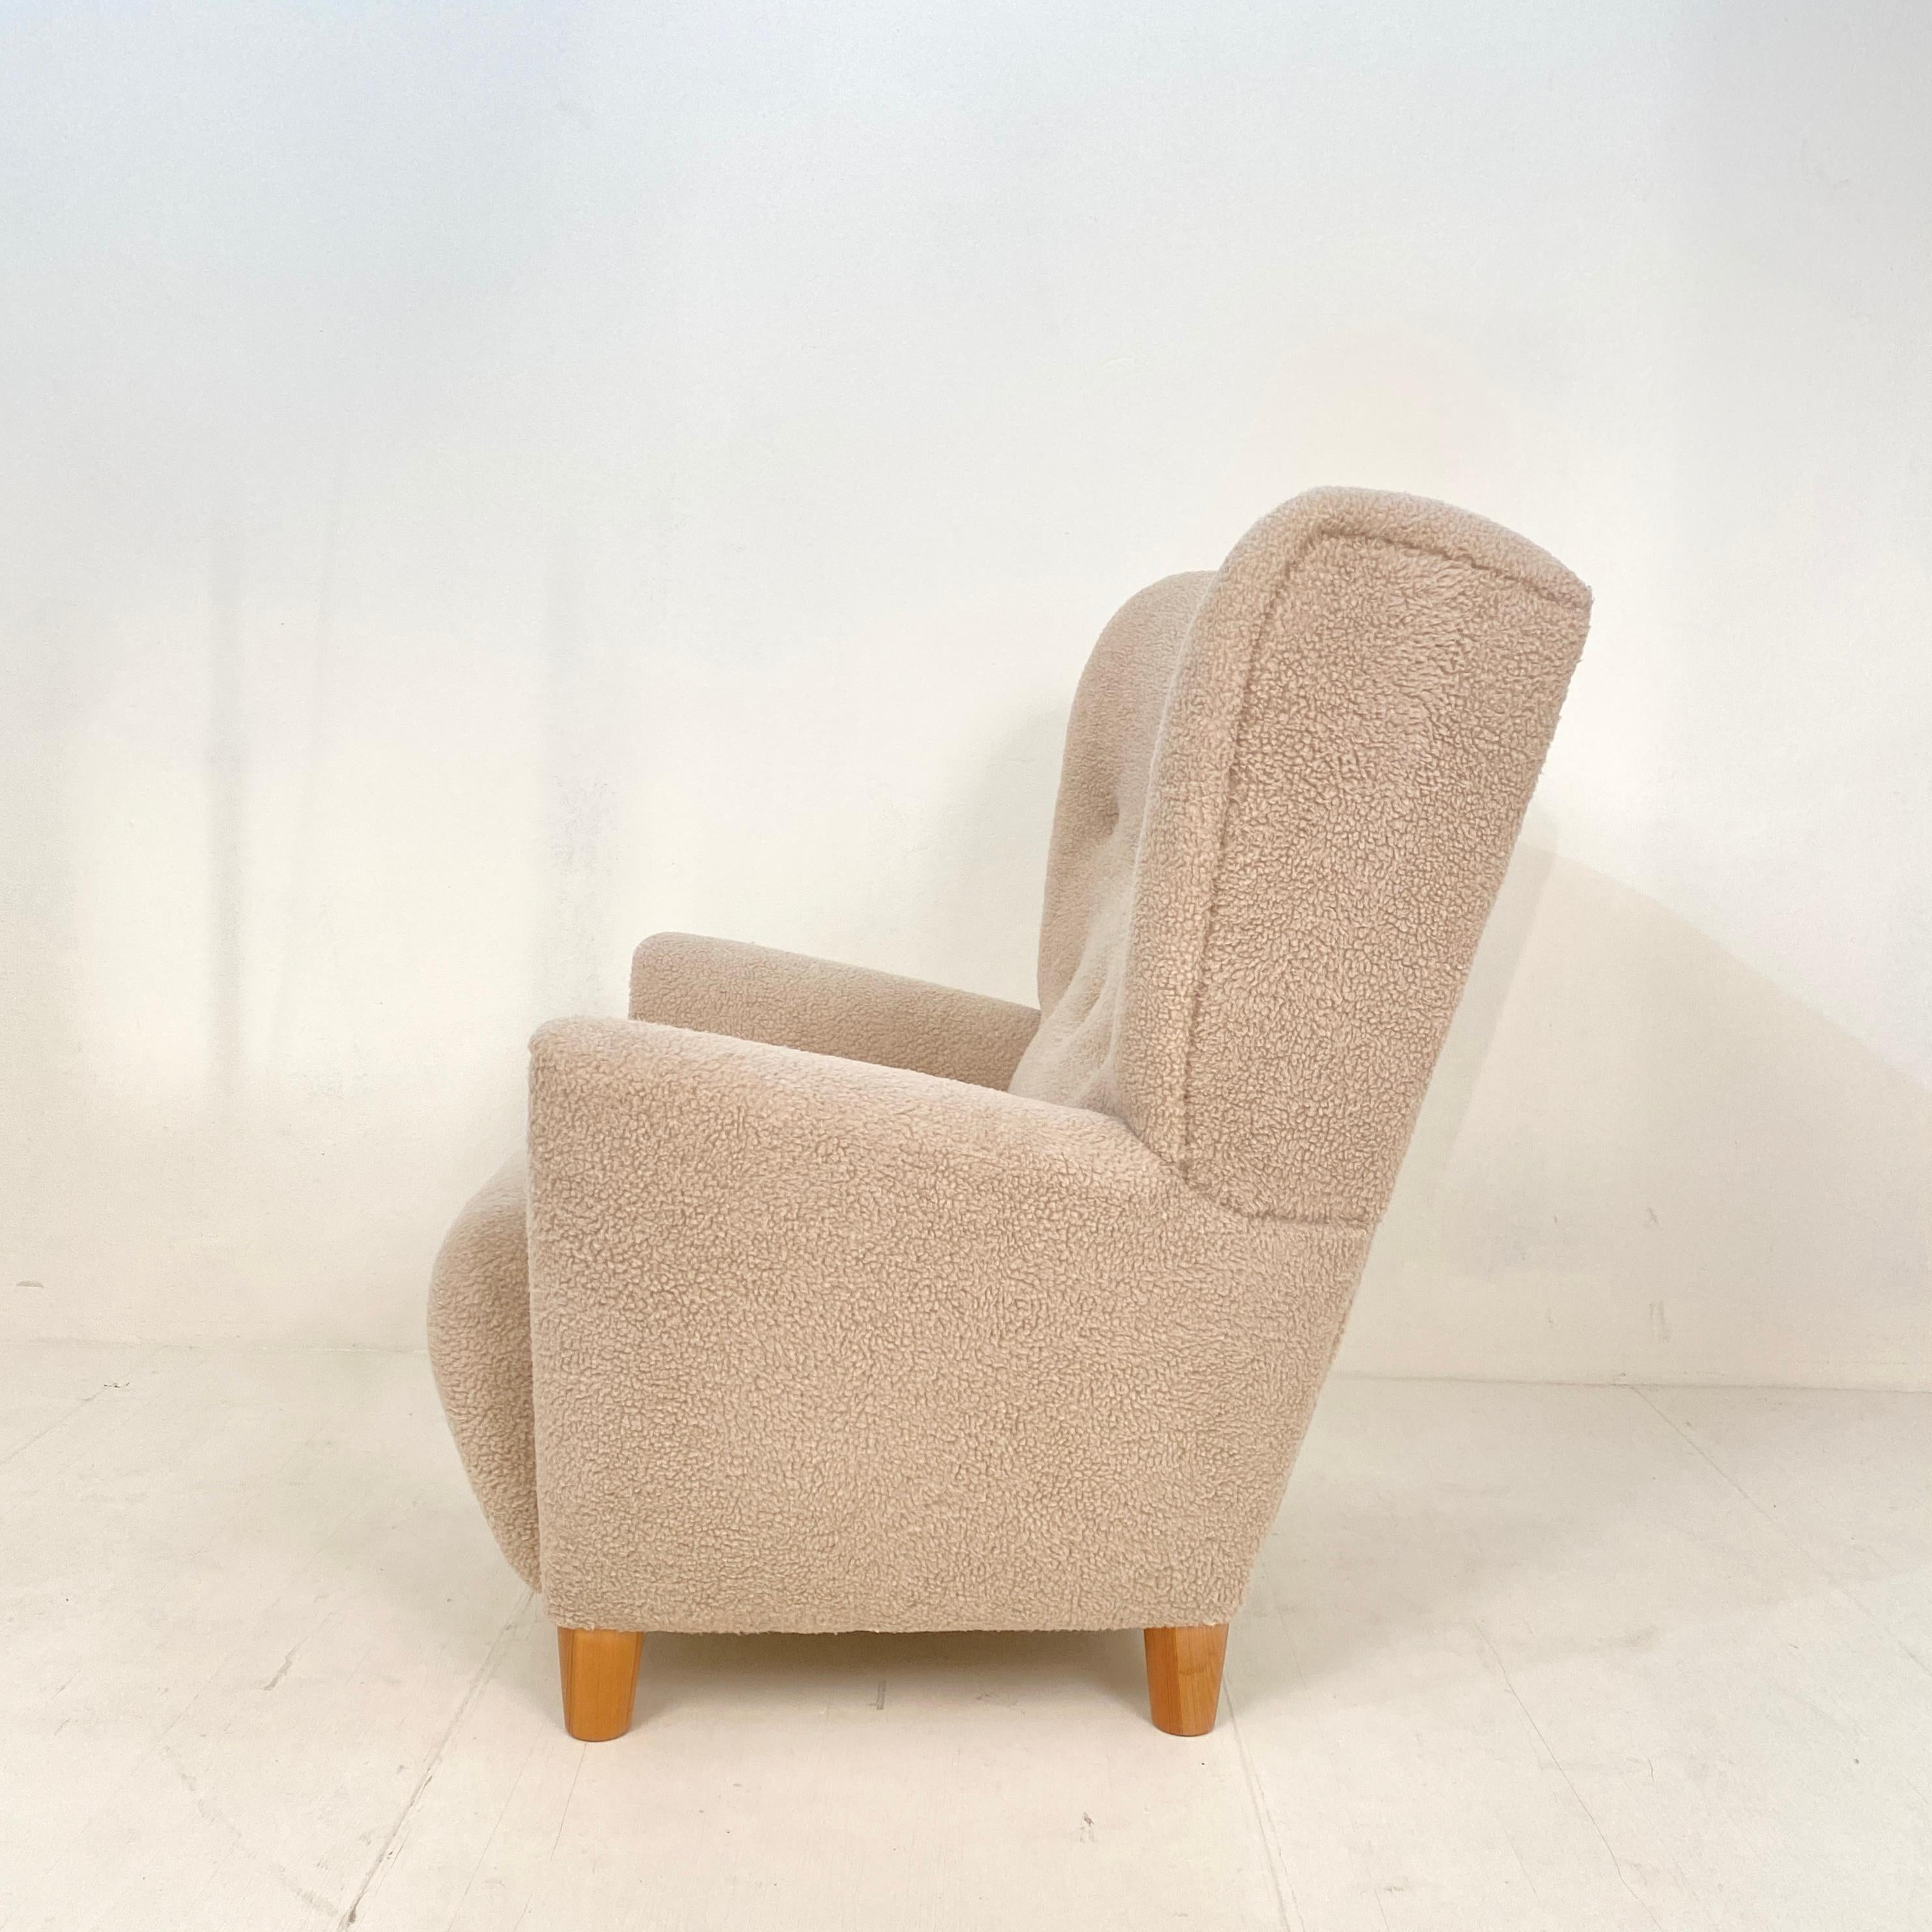 Late 20th Century Mid Century Danish Shearling High Back Wing Chair / Armchair, Around 1970s